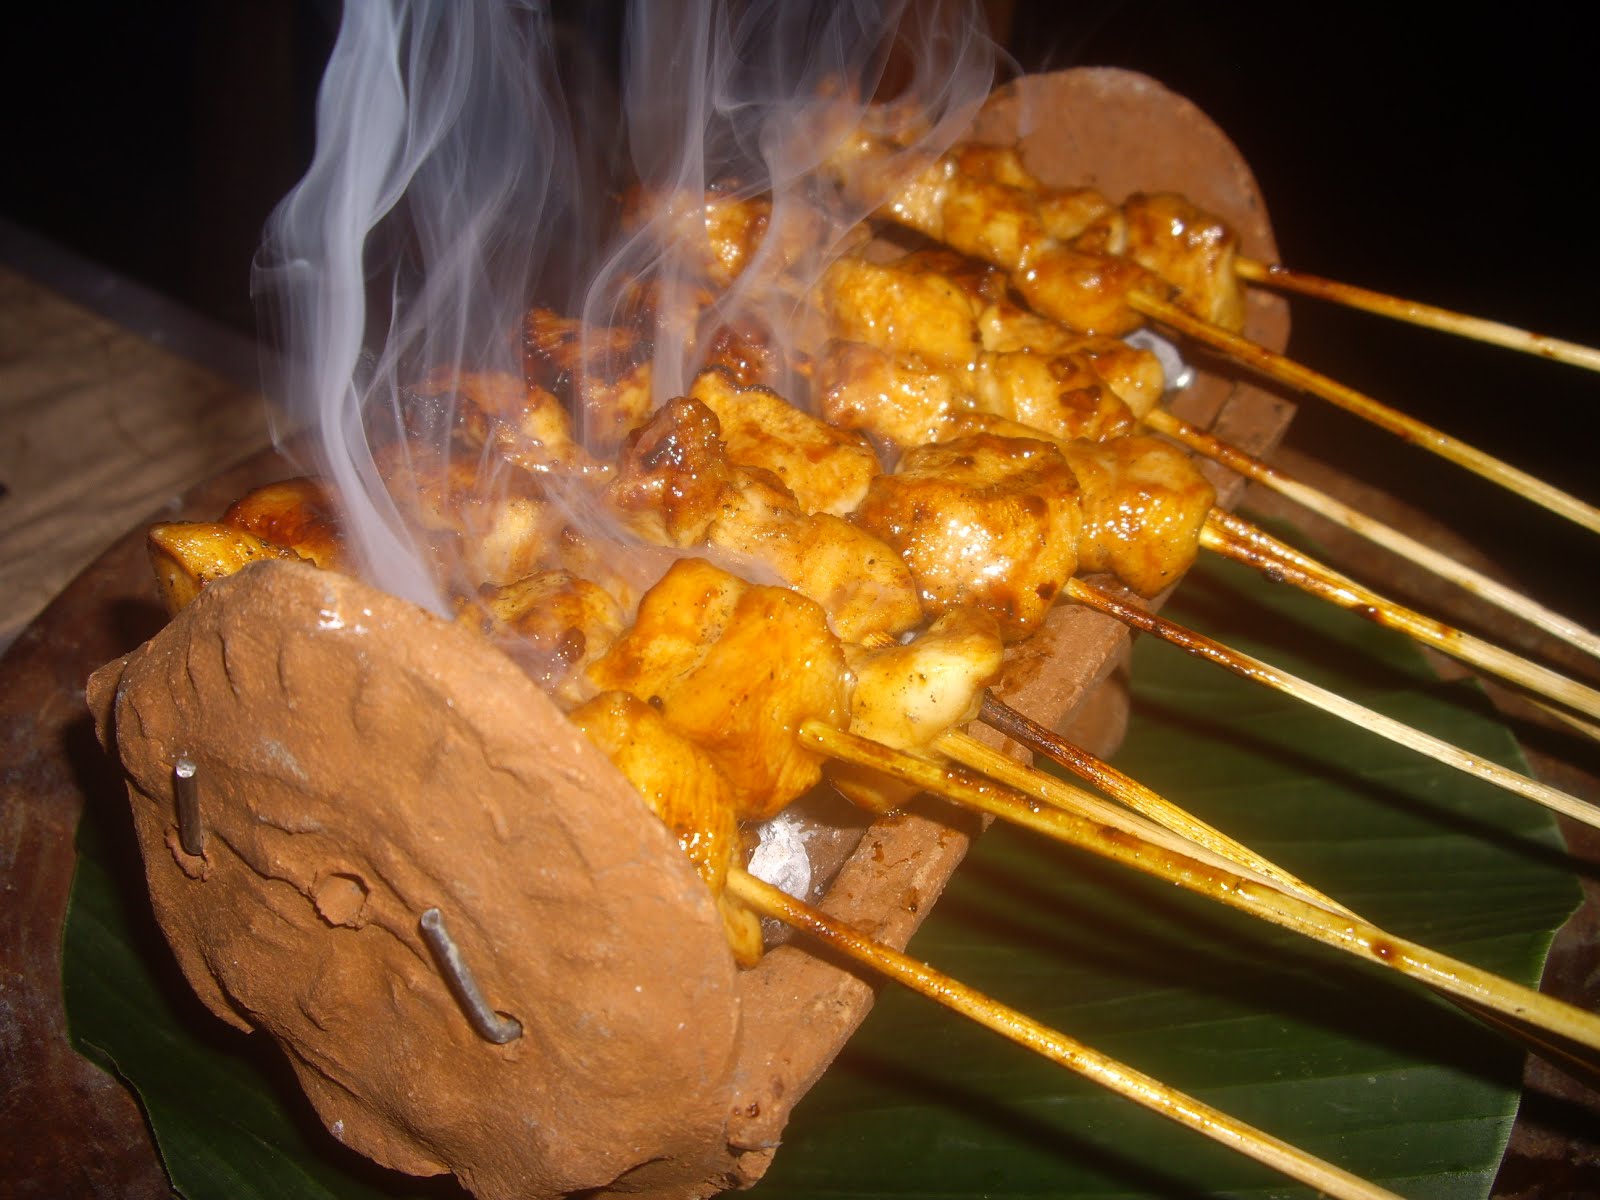 SATE STICKS GRILLED OVER A FIRE OR BRAZIER ARE A FAVORITE BALINESE CEREMONIAL FOOD